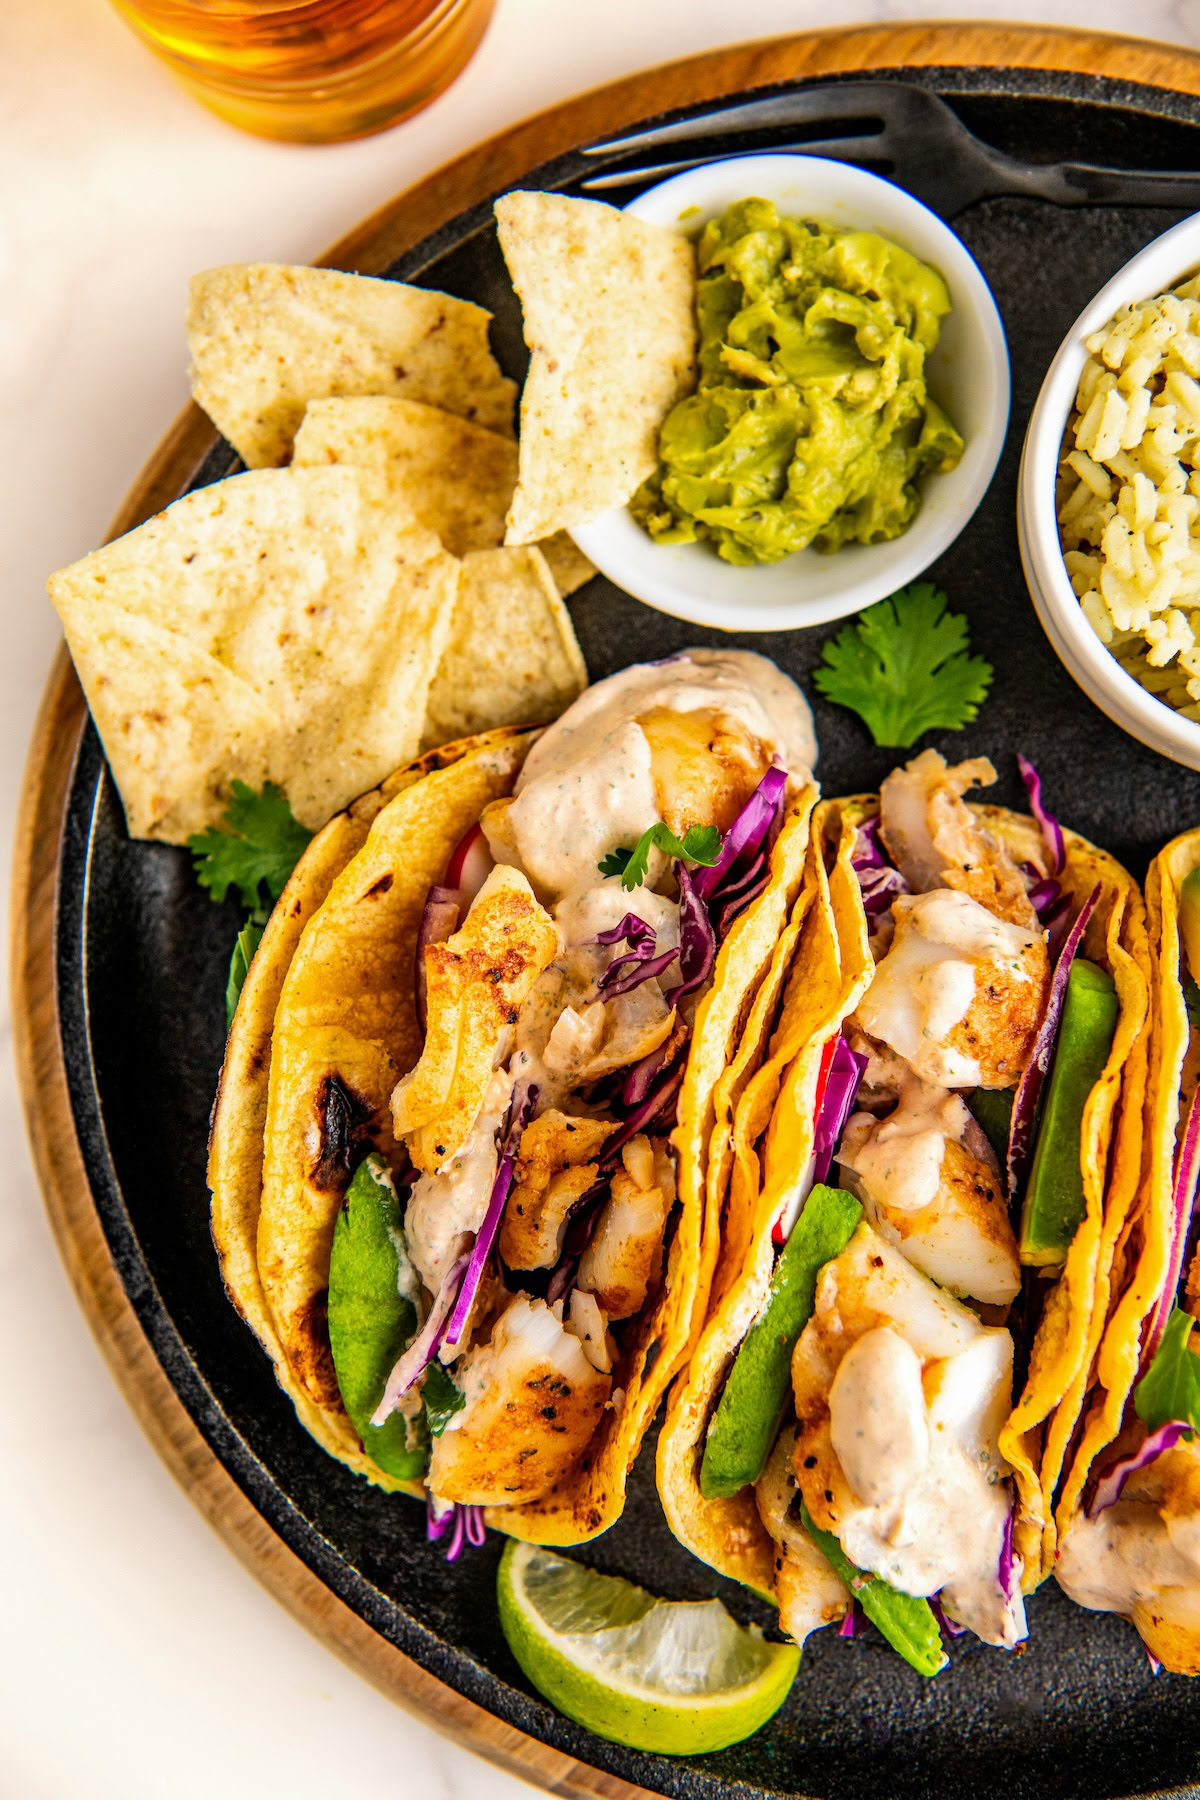 Creamy fish taco sauce drizzled over fish tacos on a plate with chips and guacamole on the side.